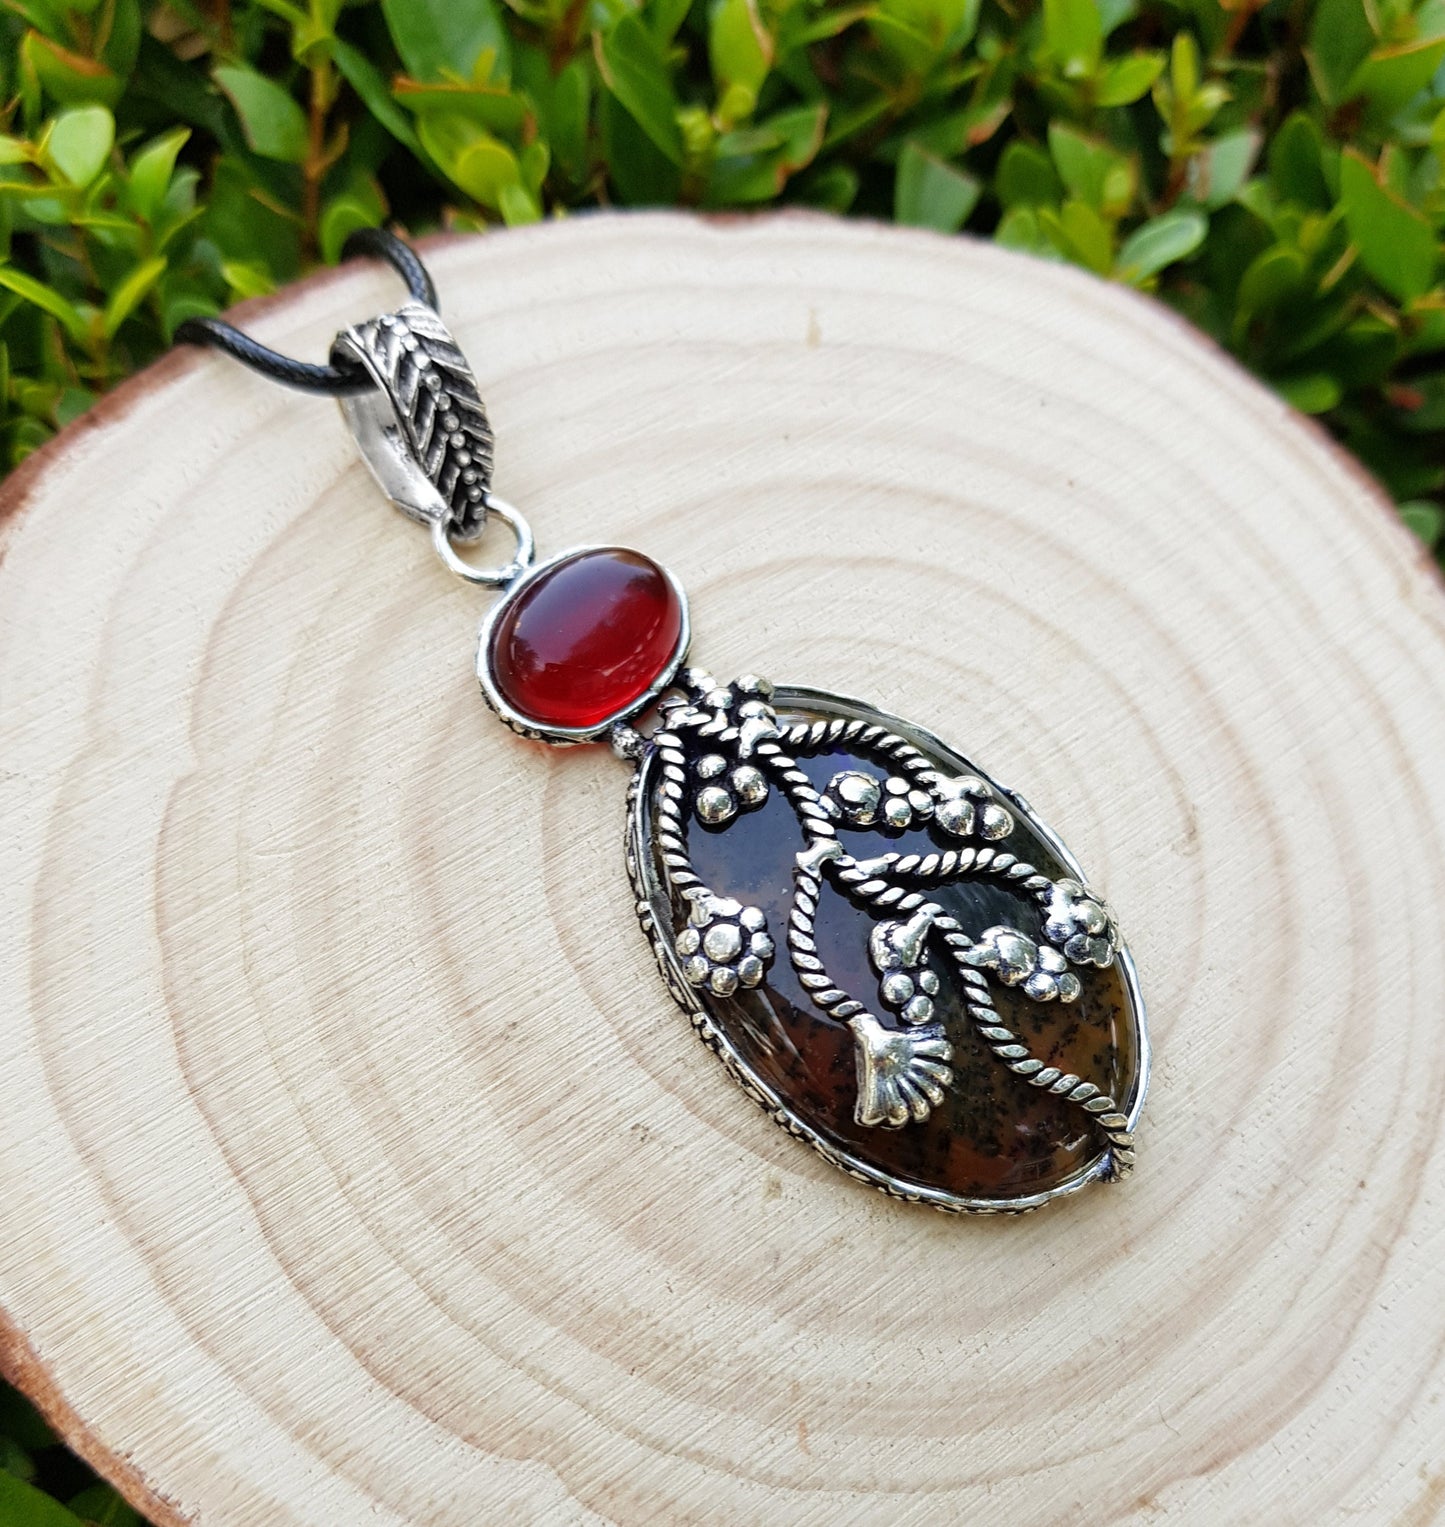 Red Carnelian Pendant In Sterling Silver Statement Necklace Boho Gemstone Pendant Unique Gift One Of A Kind Jewellery